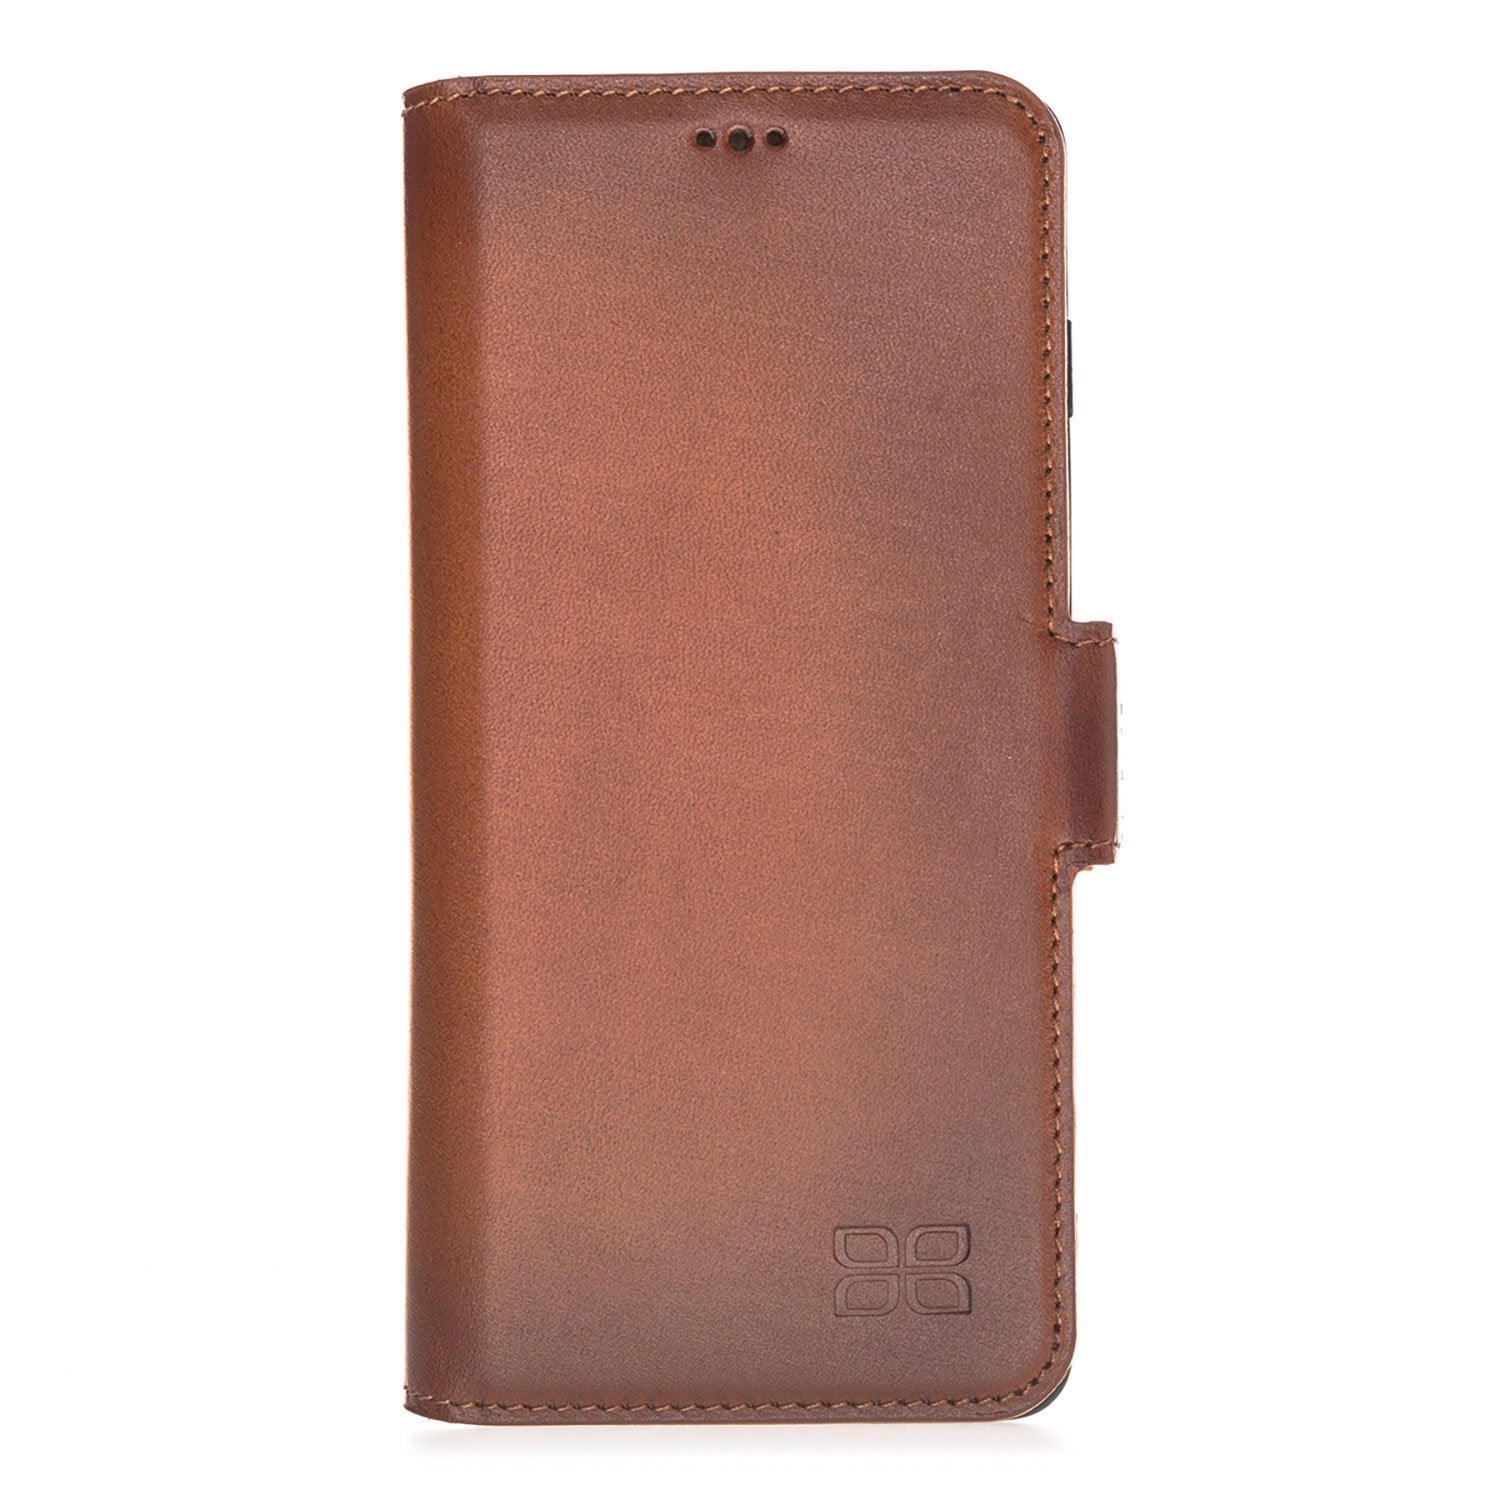 Wallet Leather Case New Edition with ID slot for Samsung S10- Rustic Tan with Effect